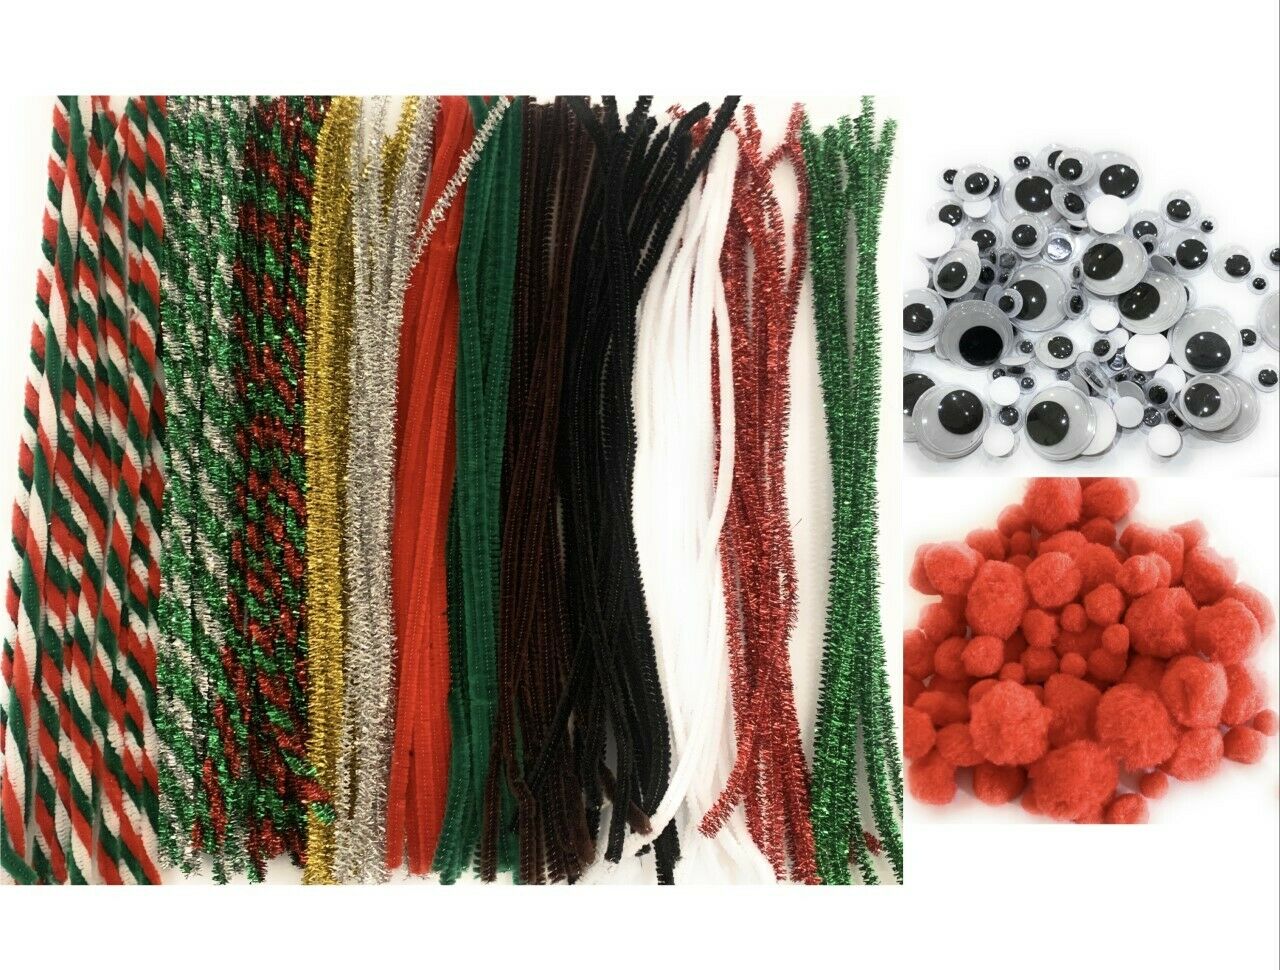 320Pcs Christmas Pipe Cleaners Craft Set Chenille Stems Googly Eyes Red Pom Poms